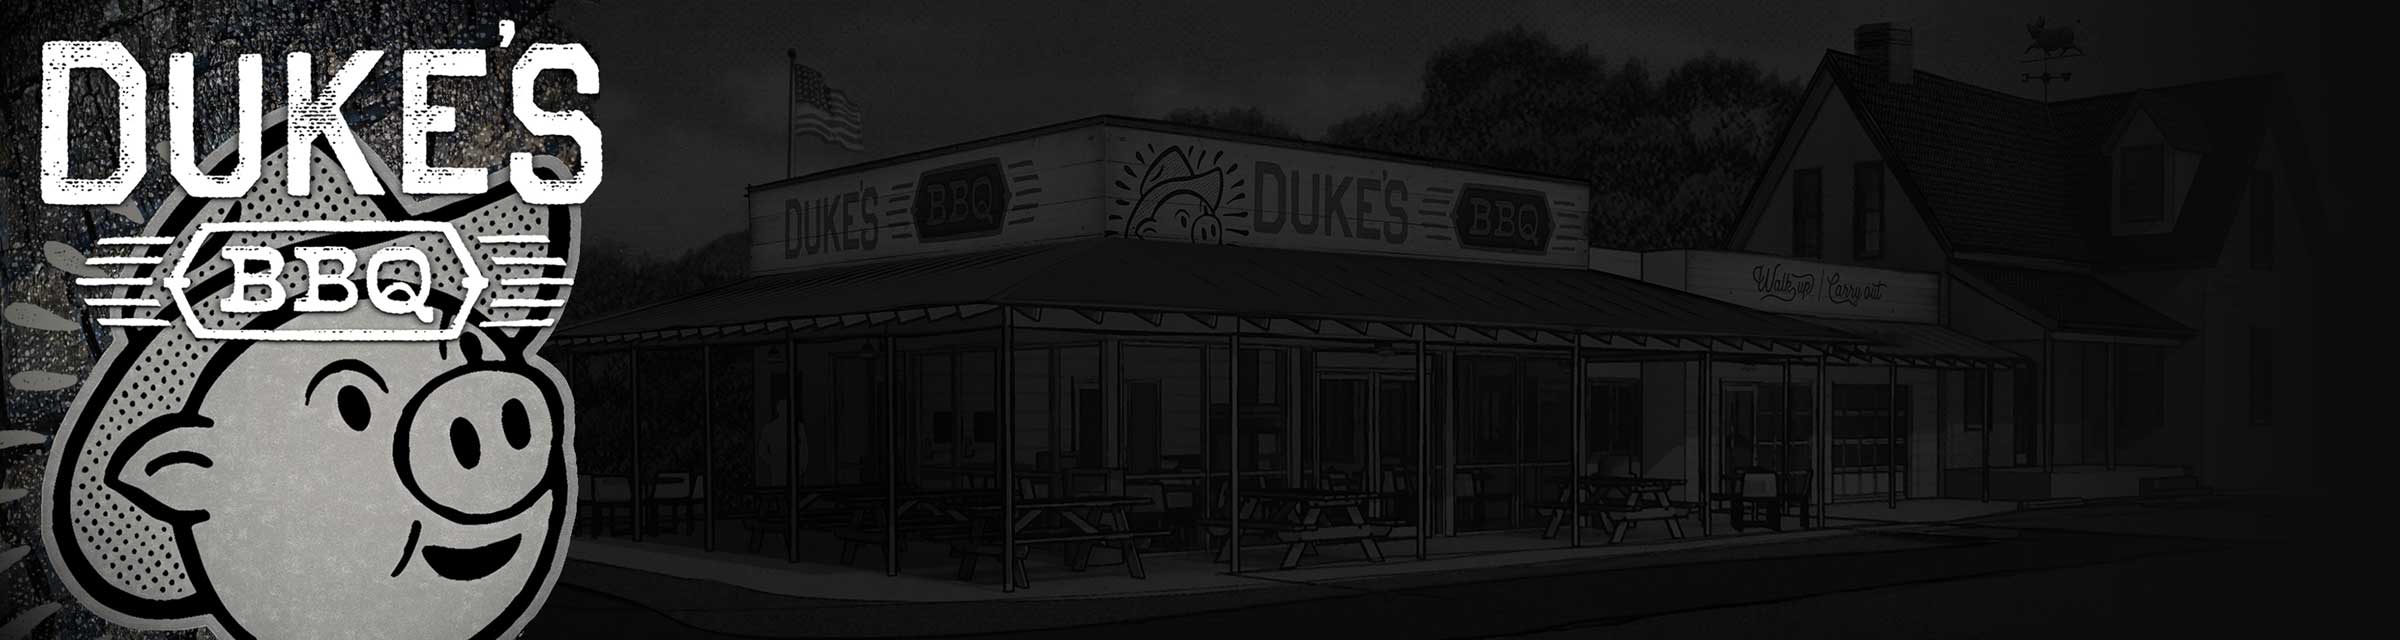 DUKES Footer Altered